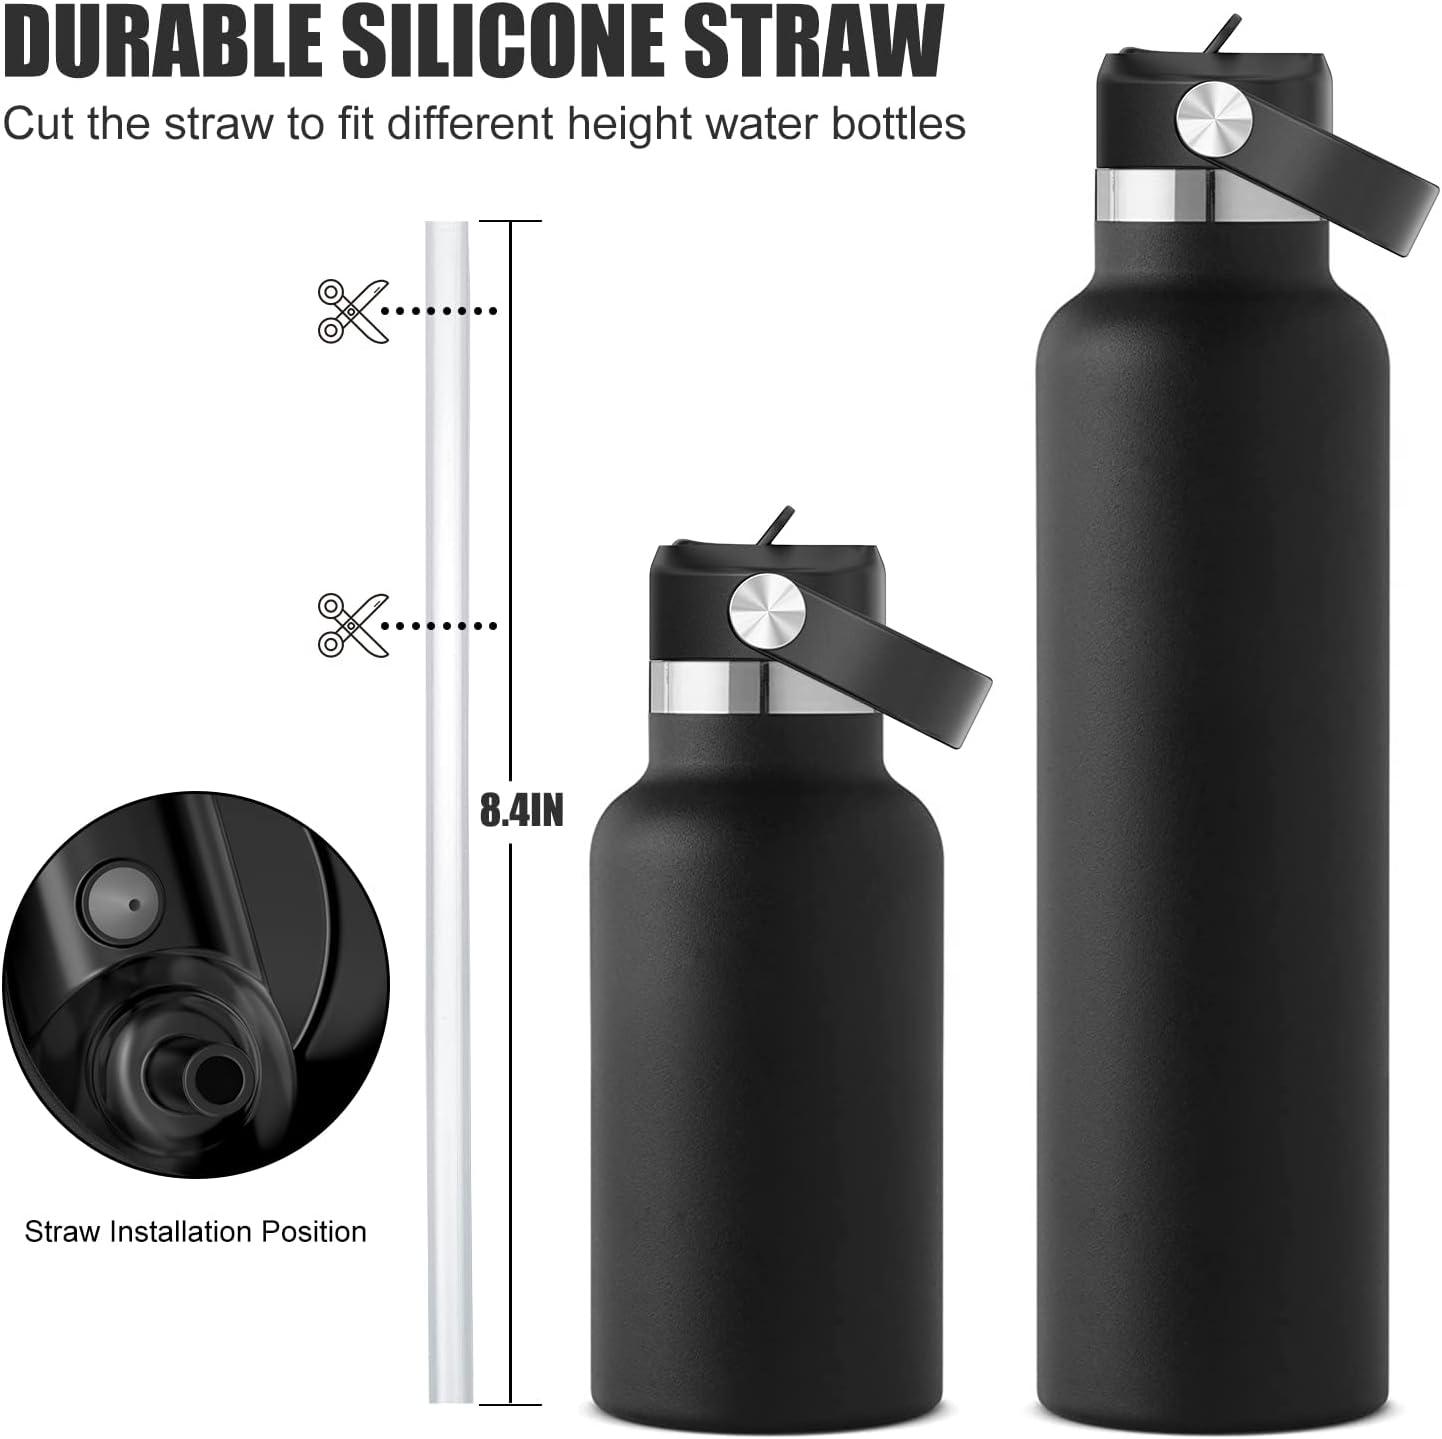 Straw Lid Replacement for Hydro Flask Standard Mouth & Simple Modern Ascent  12-64oz Bottles. New and Improved Design Sipping Cap with Straws, Brush for  18, 21, 24oz Hydroflask. 